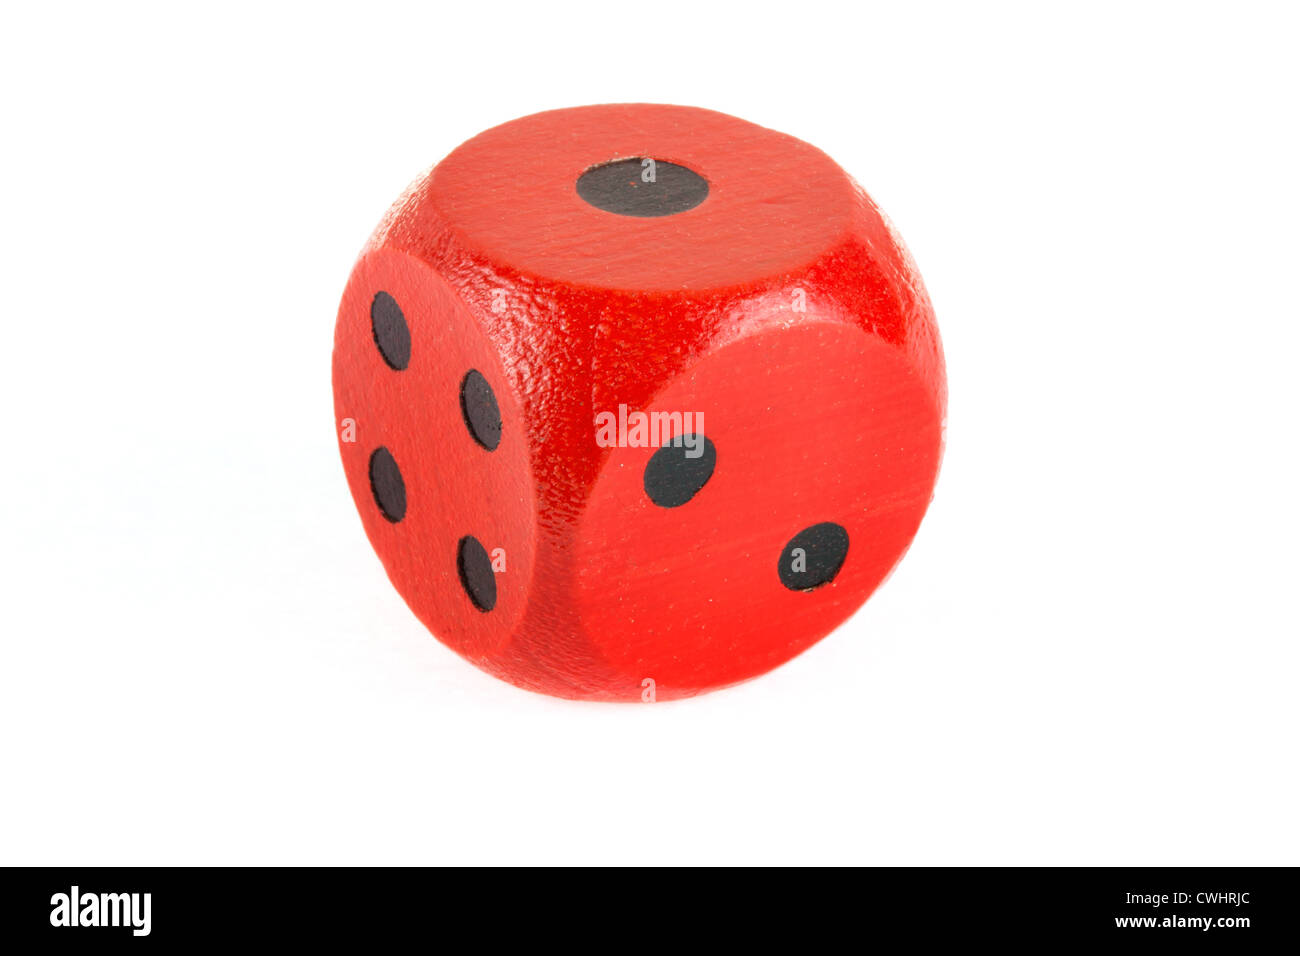 Red wooden die on a white background Stock Photo